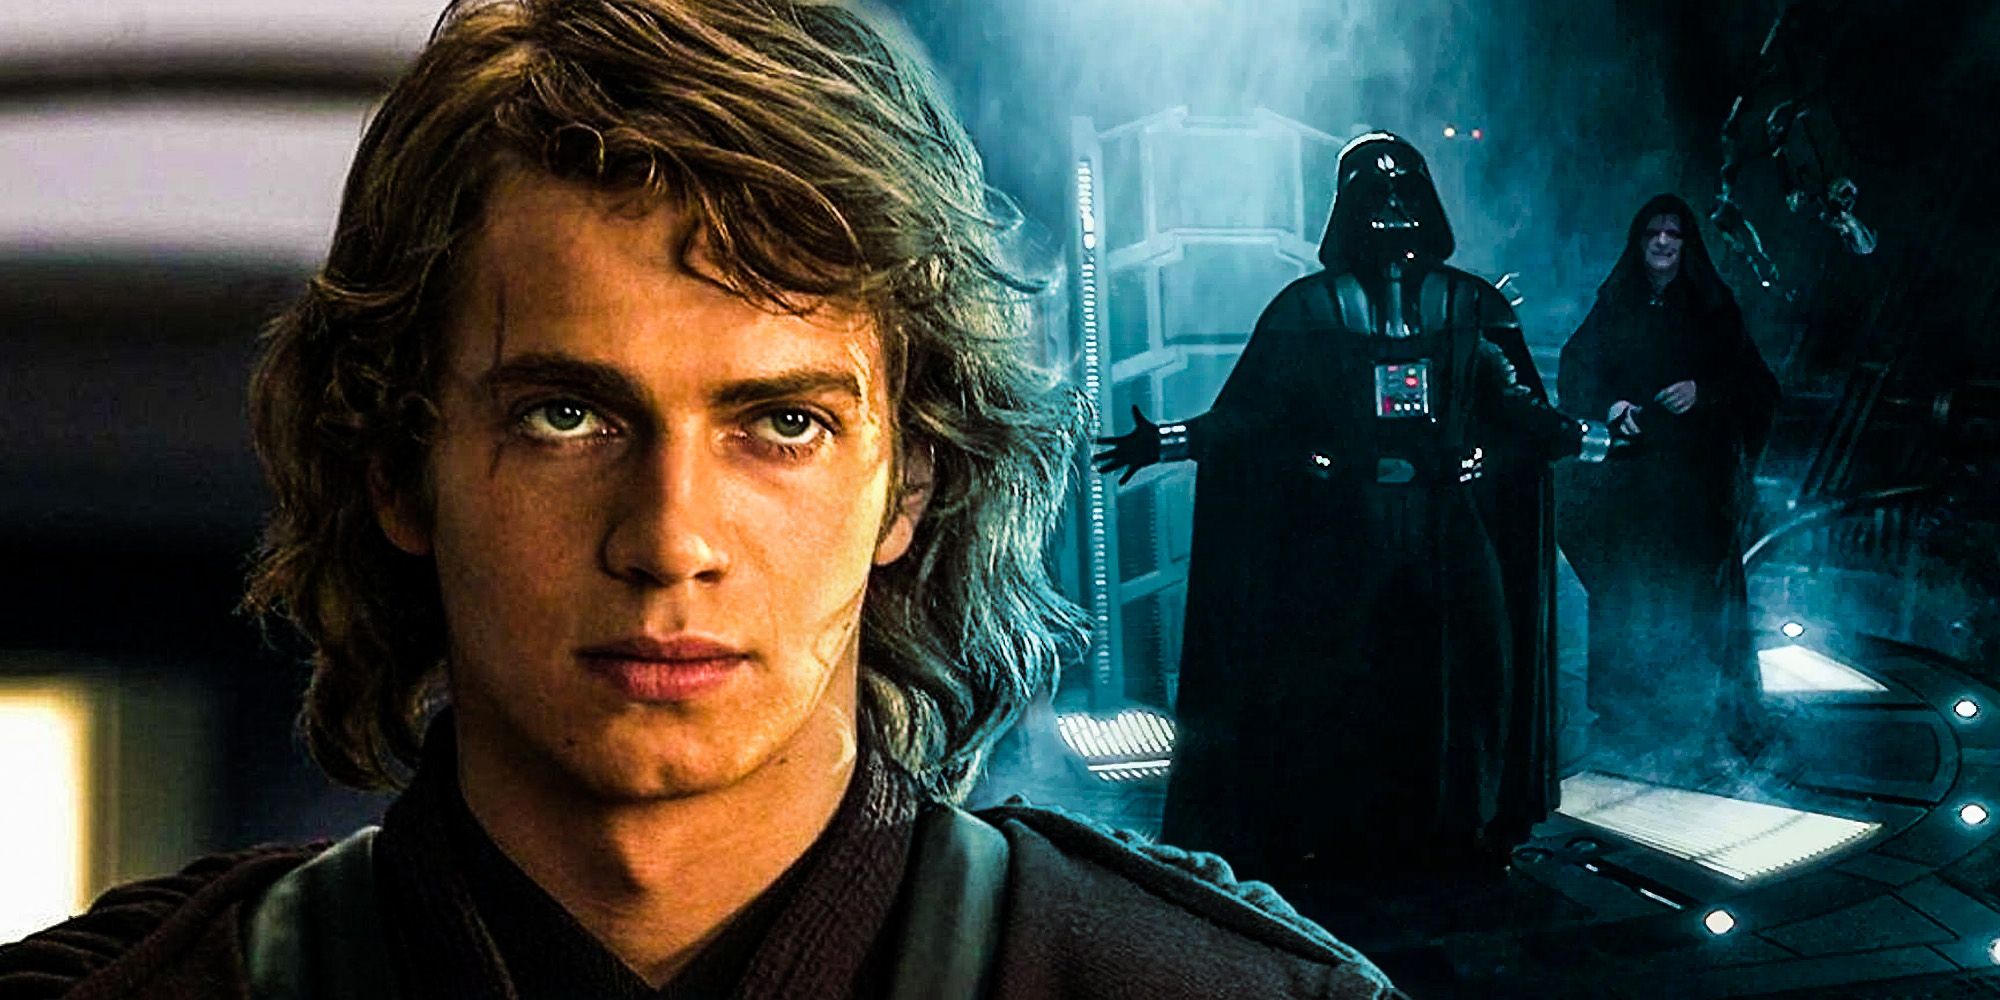 Anakin Skywalker Finally Claims The Empire… State Building In Tremendous New Video